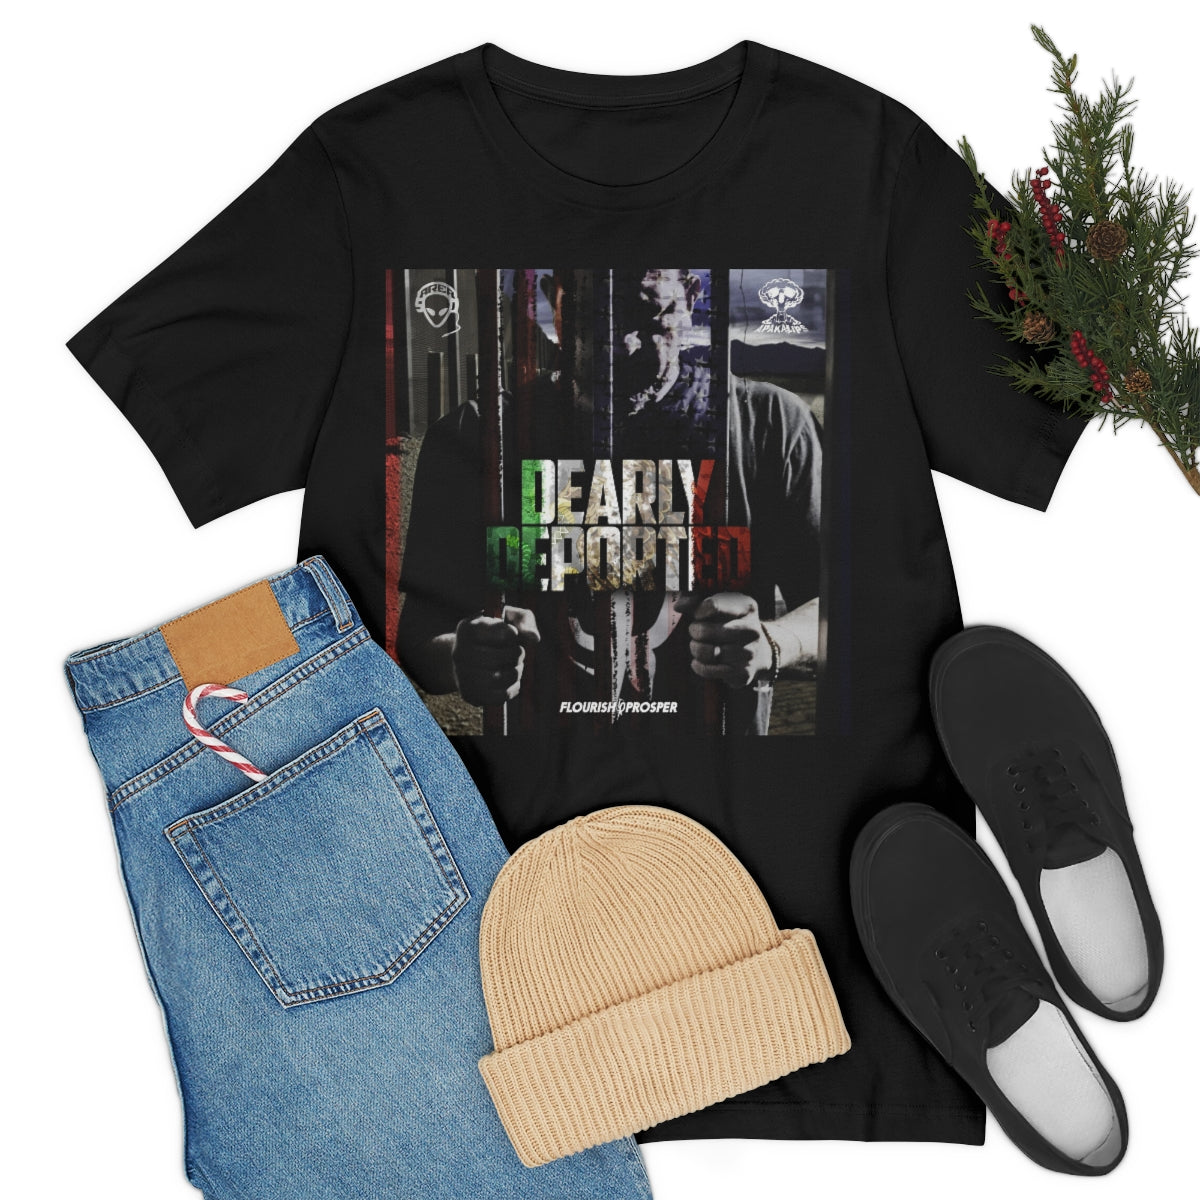 Dearly Deported Official Album T-Shirt